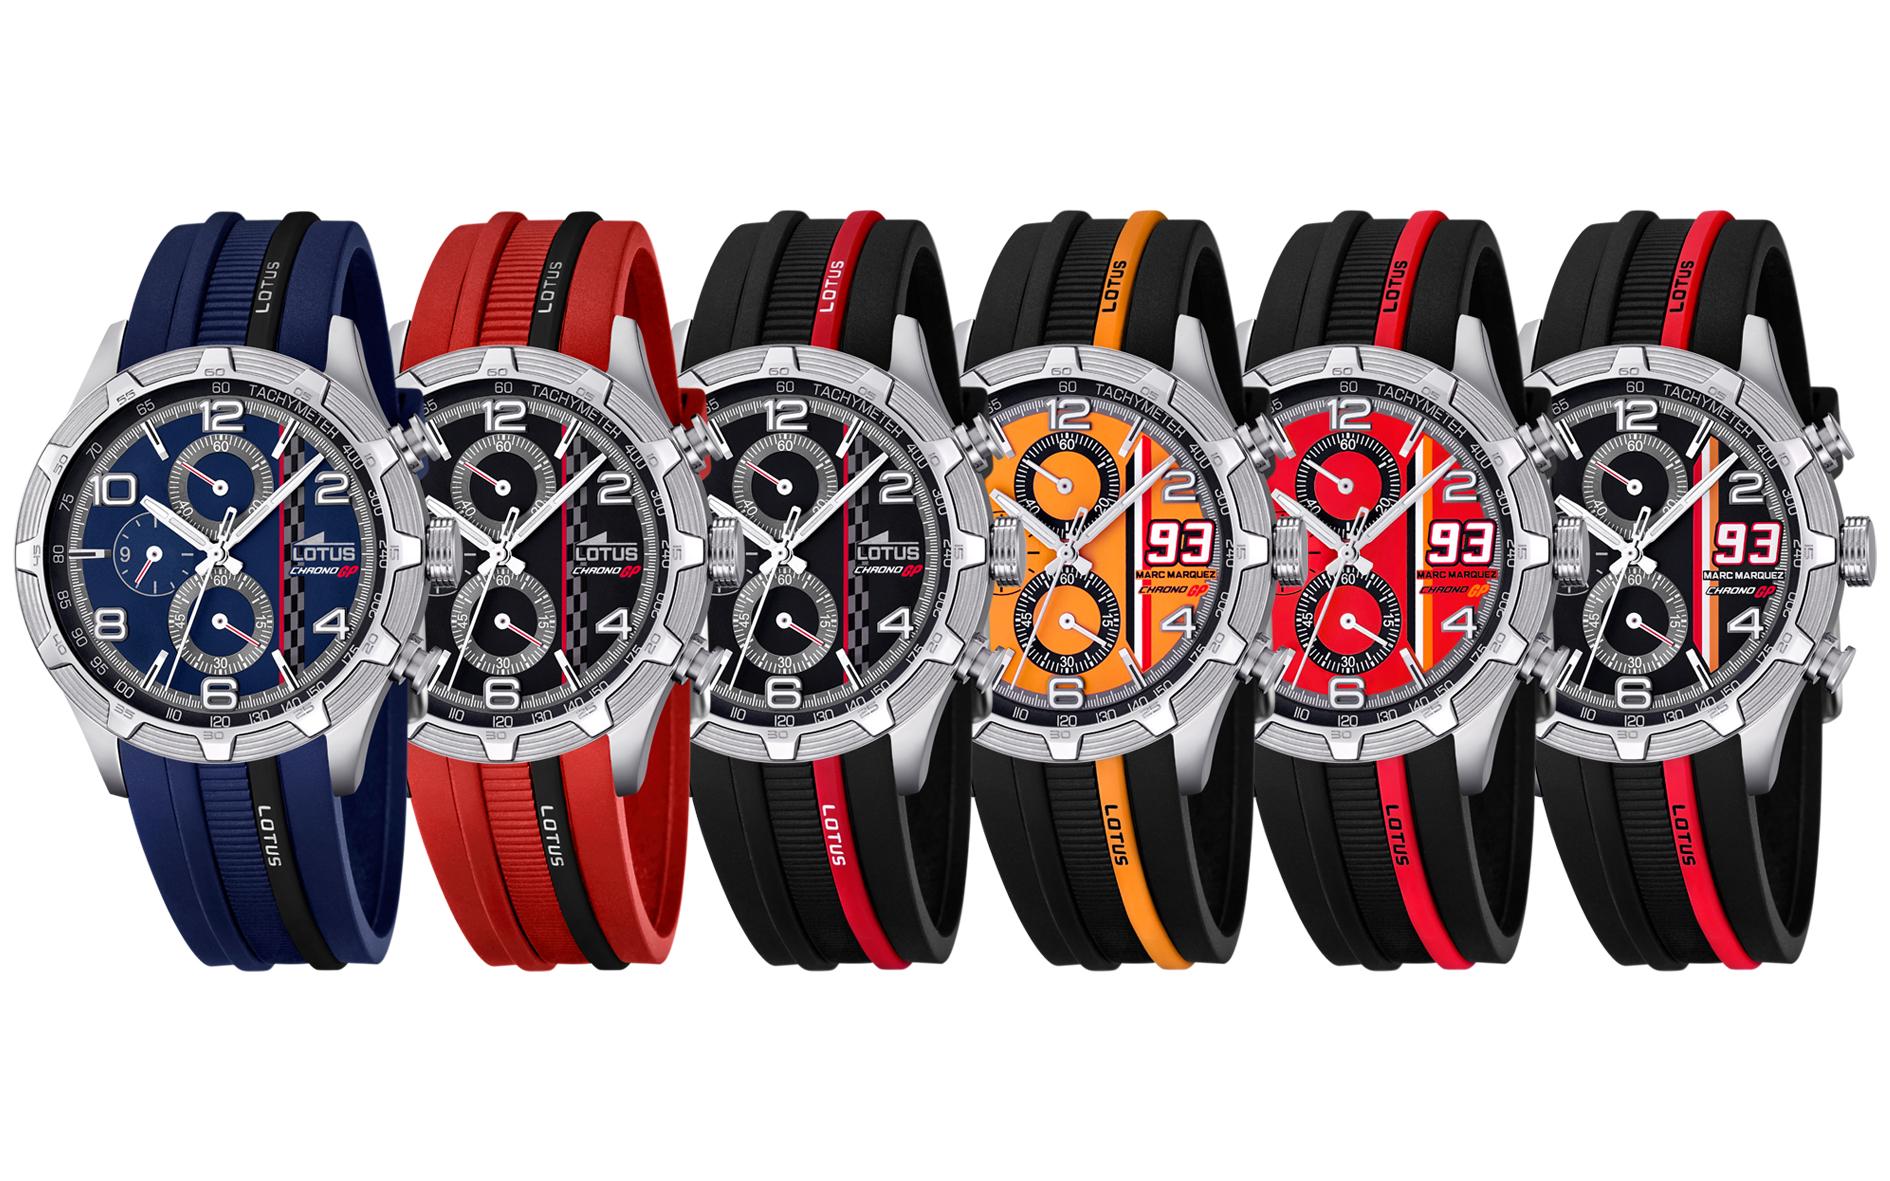 Lotus WatchUK on Twitter: set, go ... with our Marc Marquez Moto GP range #lotuswatch #lotus #watch #gold #motogp #marcmarquez / Twitter